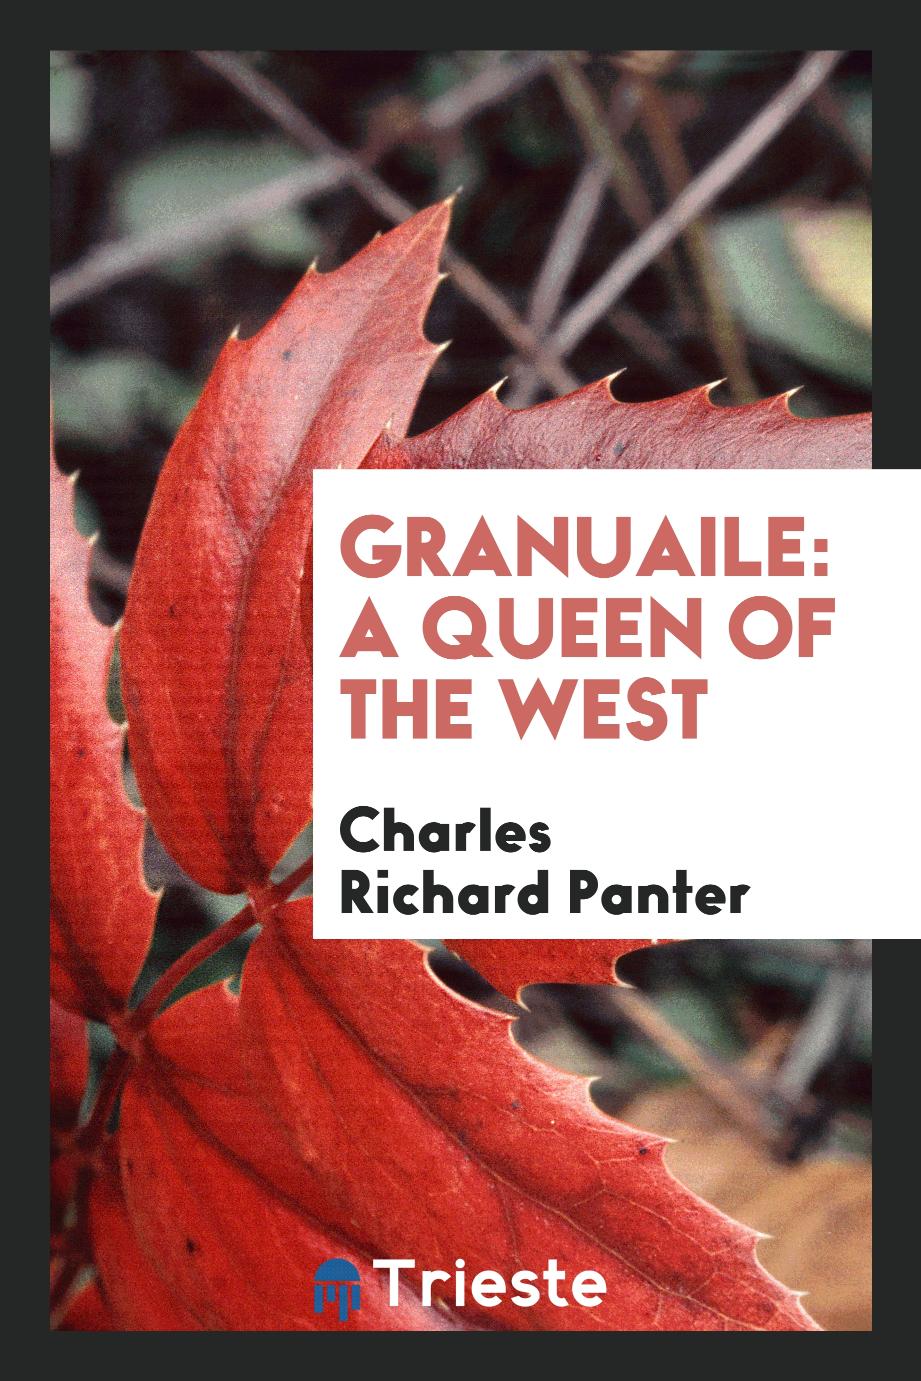 Granuaile: A Queen of the West